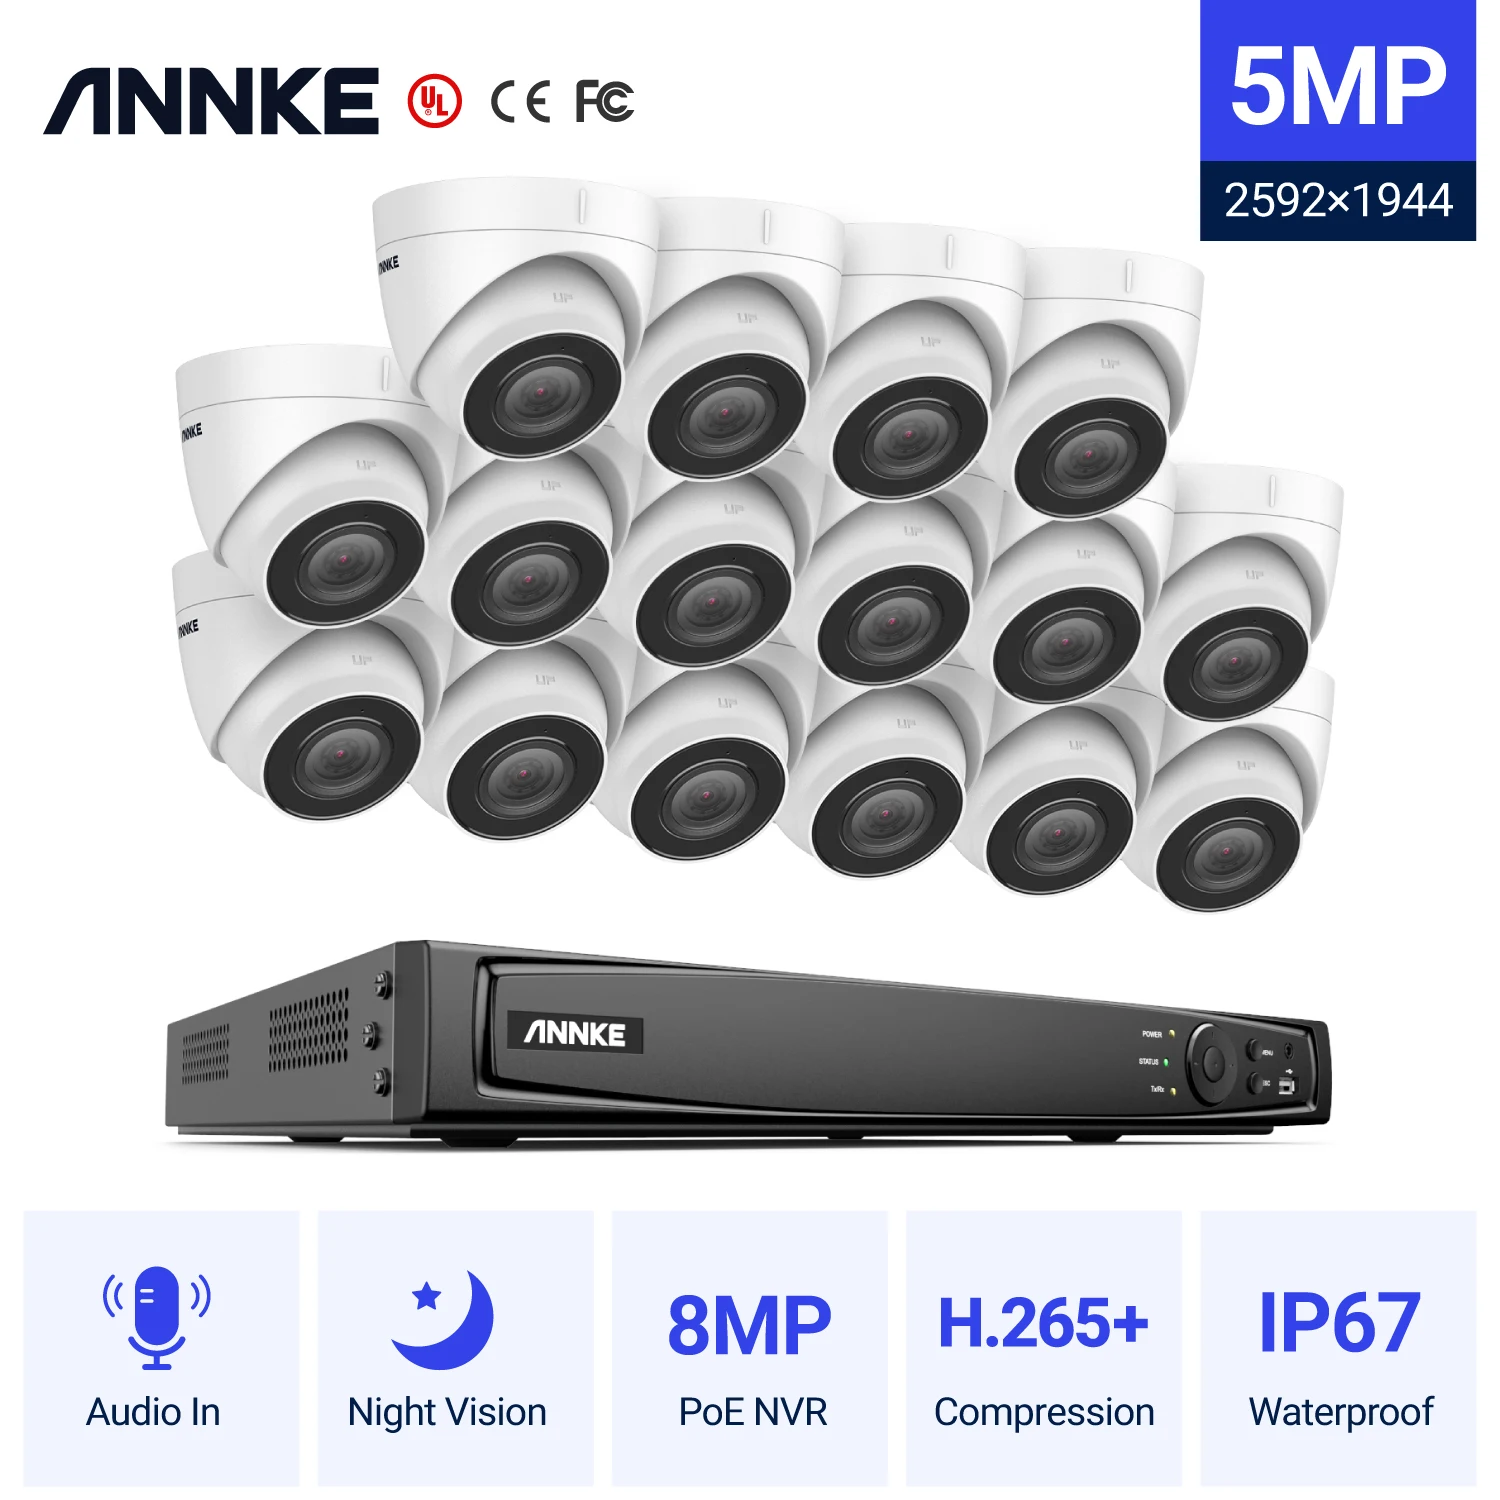 

ANNKE 16CH FHD 5MP POE Video Security System H.265+ 8MP NVR With 16X 5MP Weatherproof Surveillance POE Cameras With Audio Record